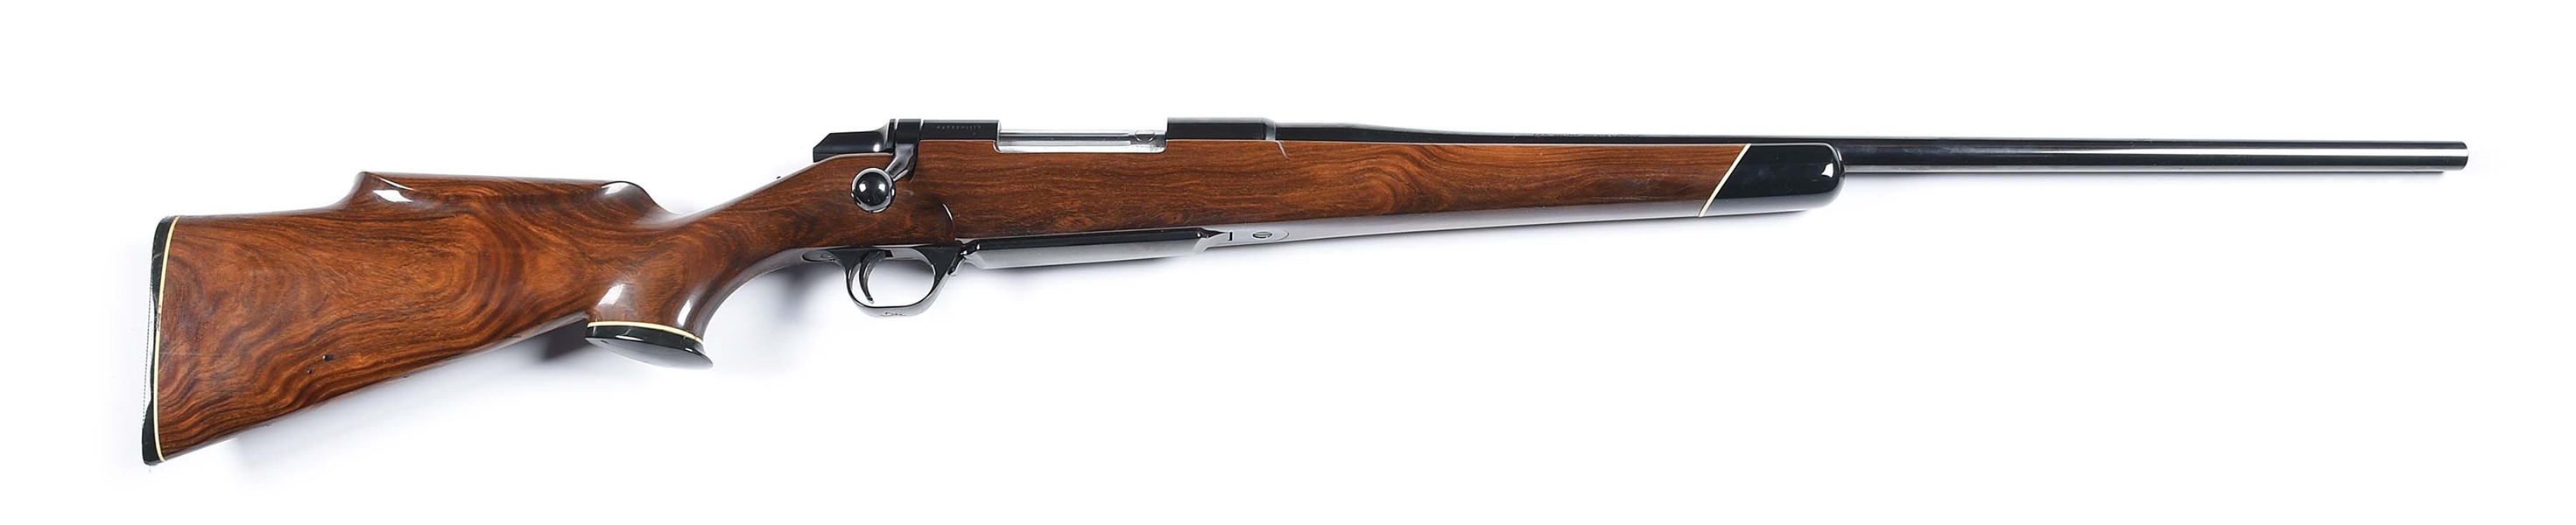 (M) BROWNING BBR BOLT ACTION RIFLE WITH JACARANDA (AMAZON AS) STOCK.